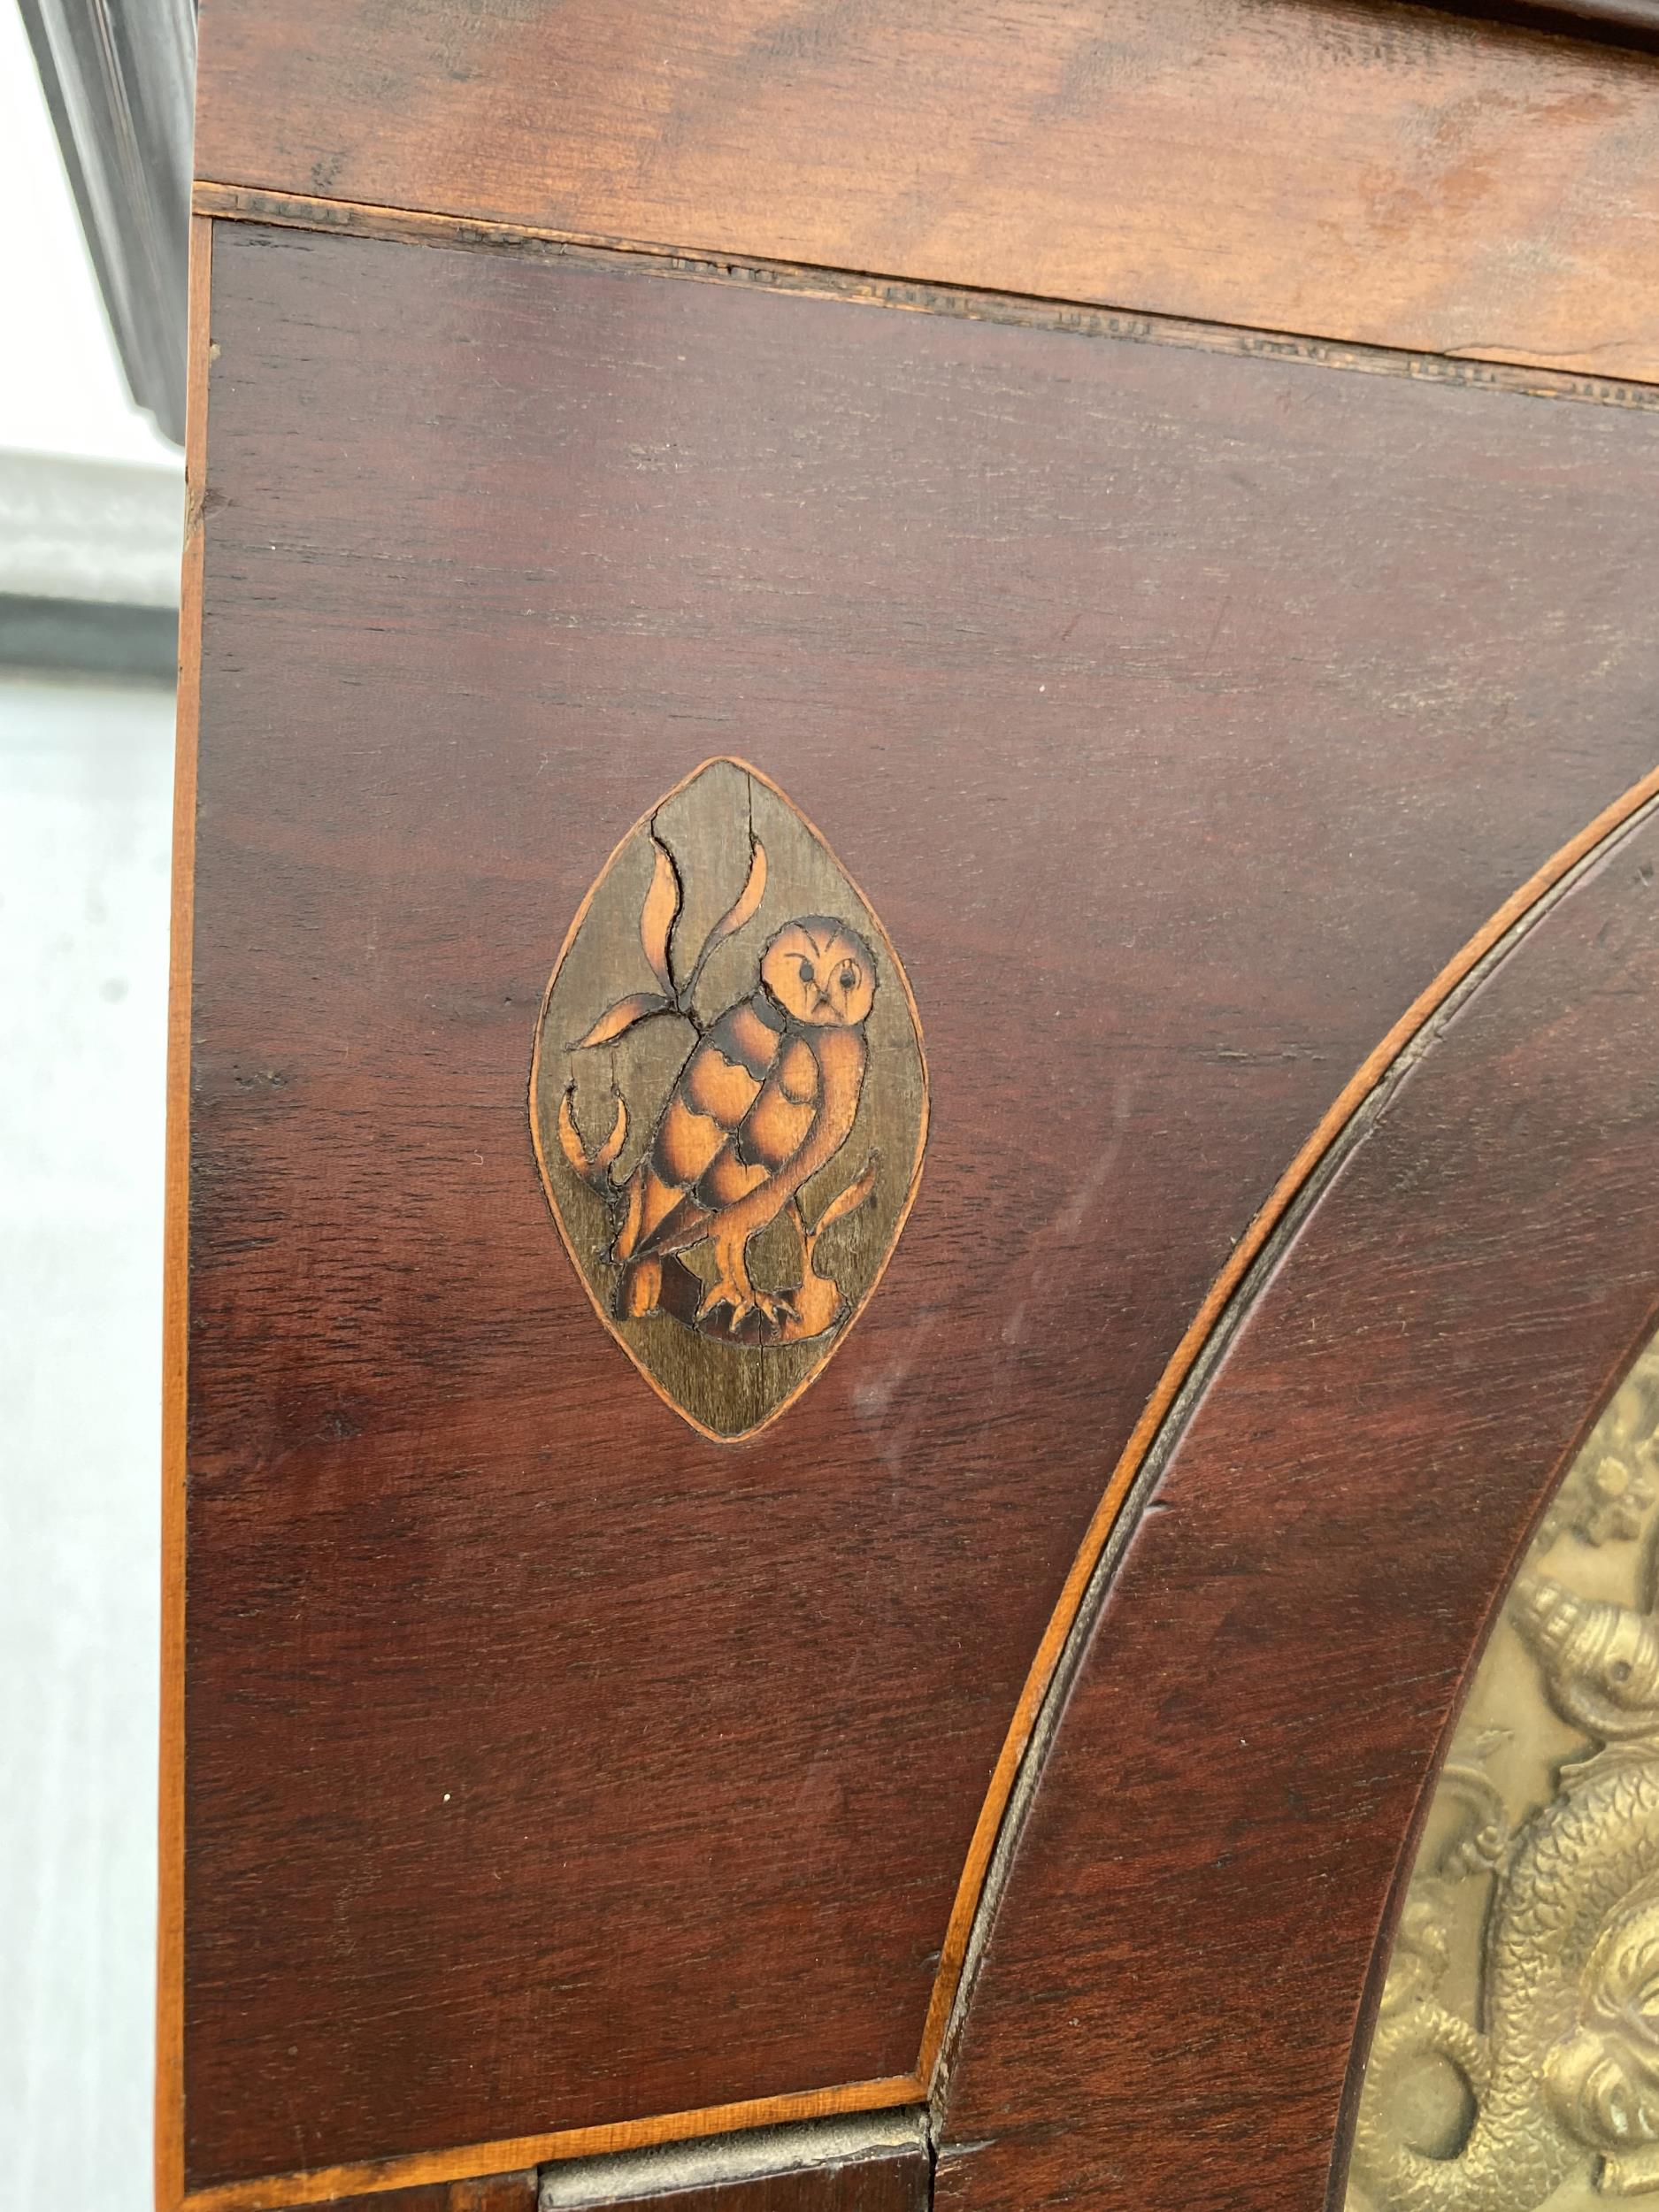 AN 18TH CENTURY MAHOGANY EIGHT-DAY LONGCASE CLOCK WITH BRASS FACE AND INLAID OVALS DEPICTING BIRDS - Image 8 of 12